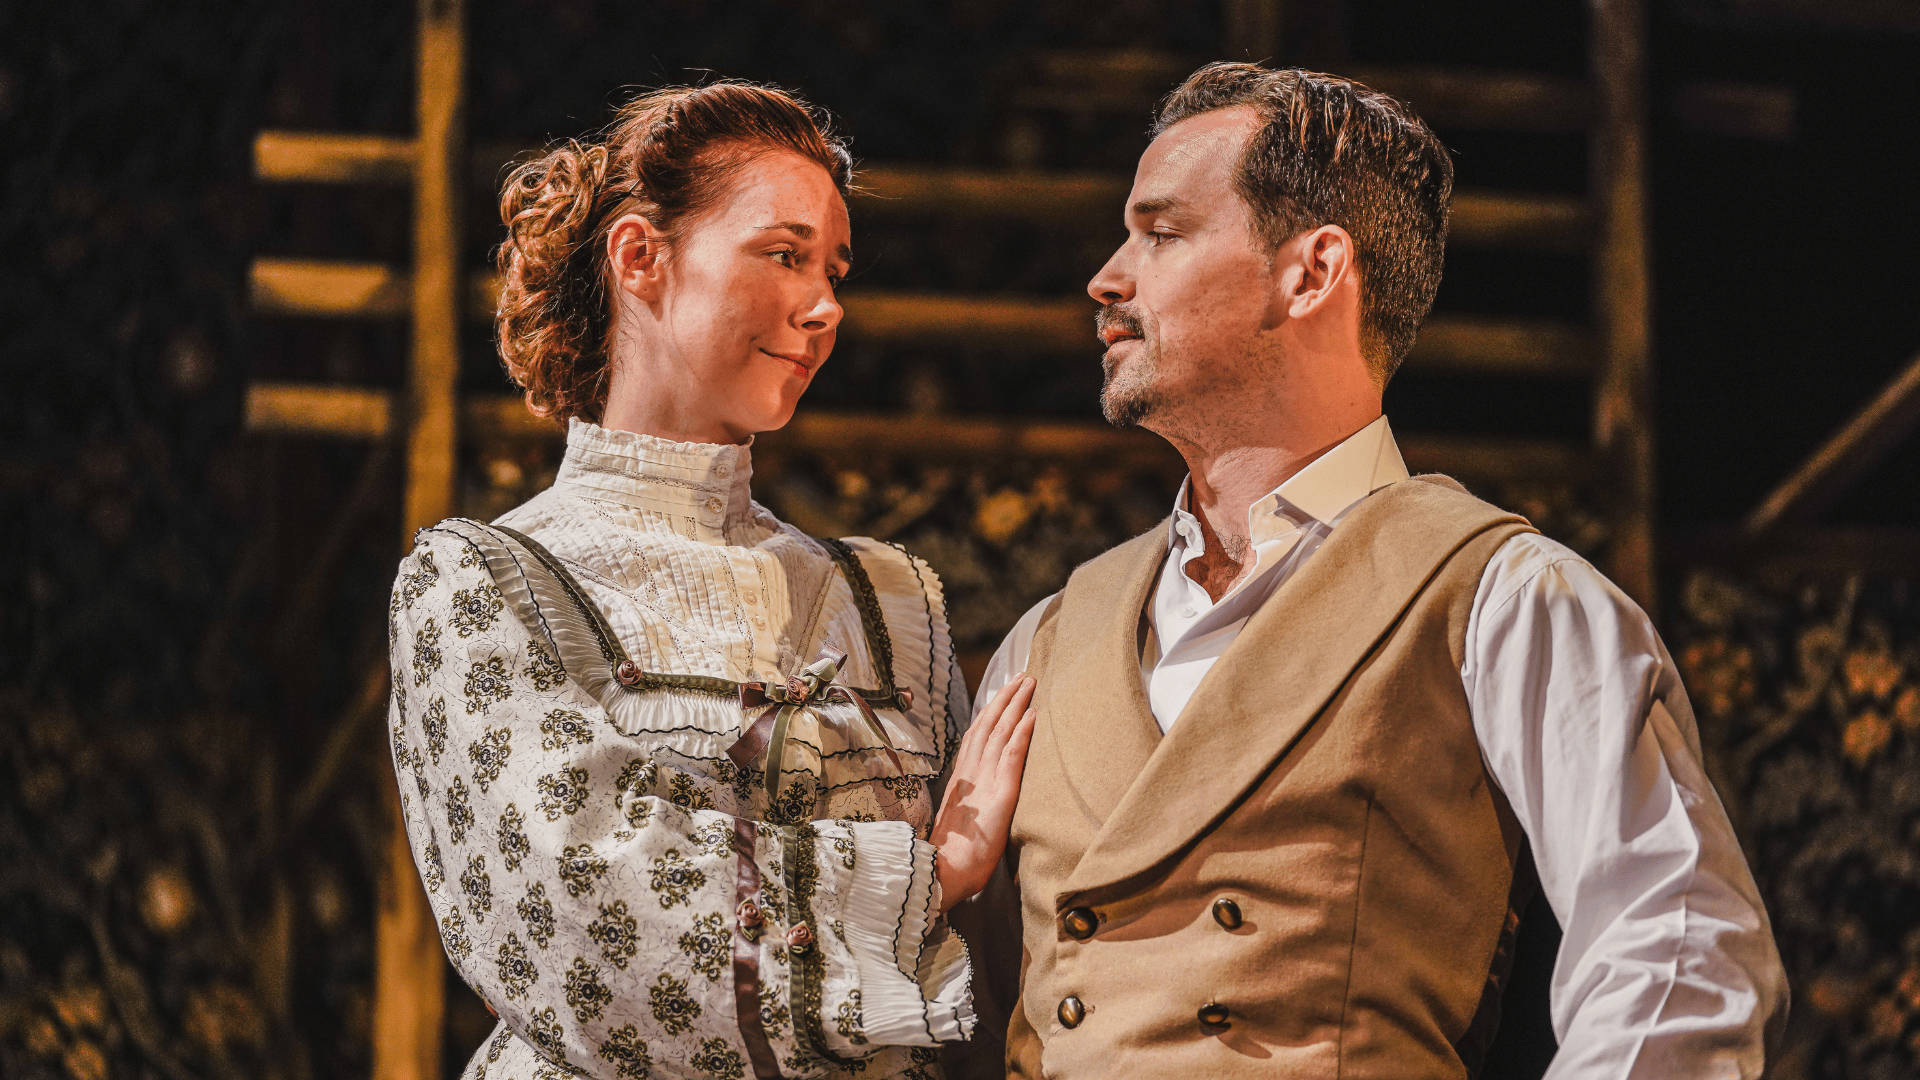 A woman in a Victorian dress with her hand on the arm of a man a tan coloured waistcoat. They stare into each other's eyes.